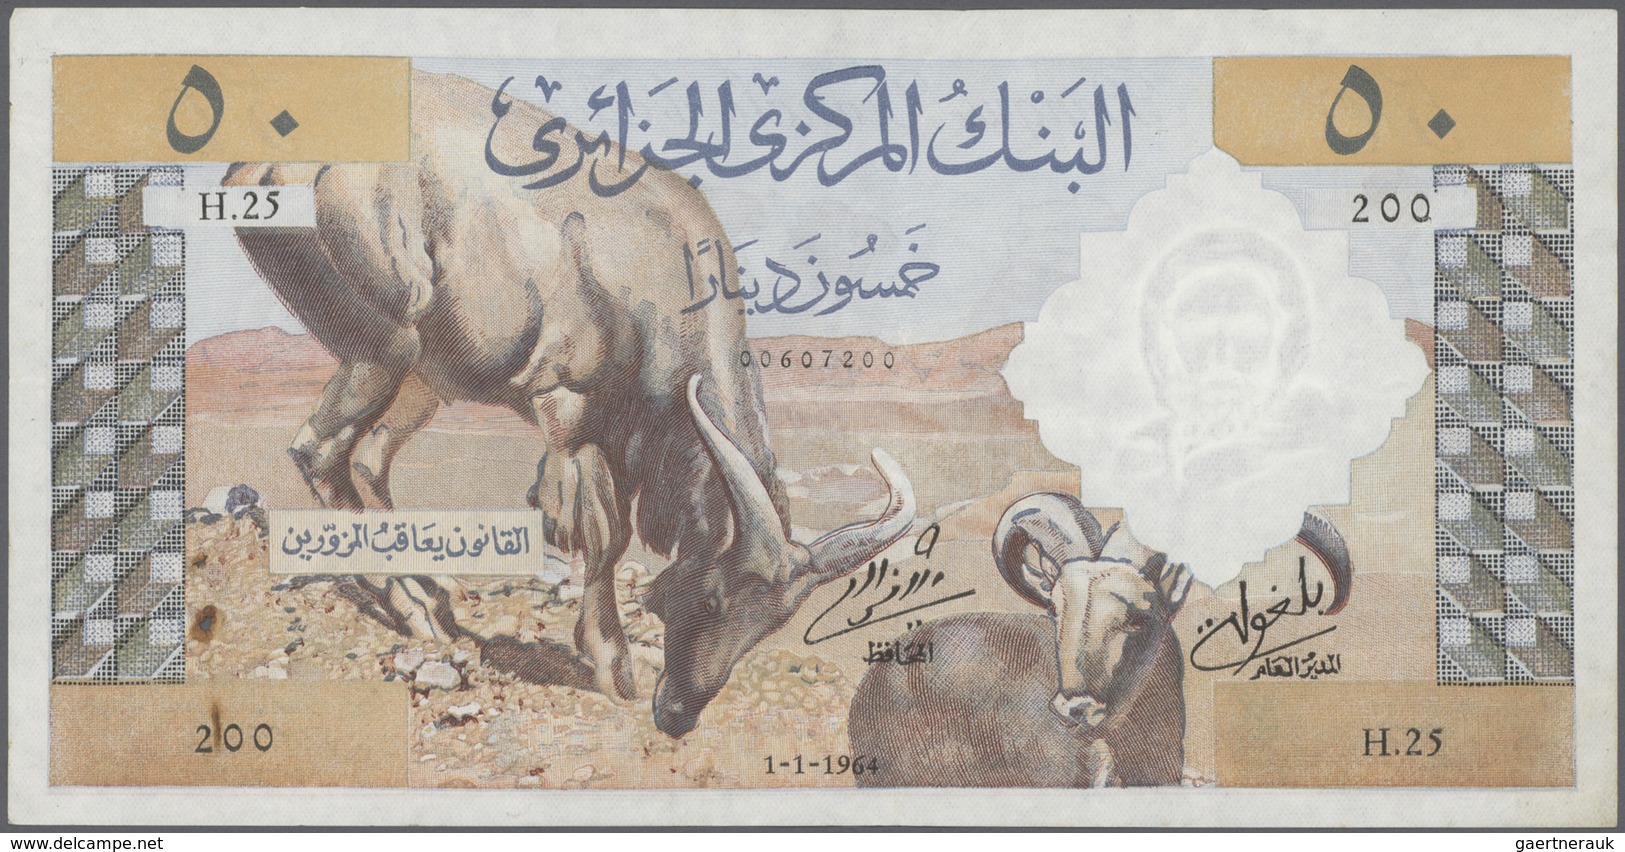 Algeria / Algerien: Set Of 2 Notes 50 Dinars 1964 P. 124, Both In Lightly Used Condition, Not Washed - Algeria